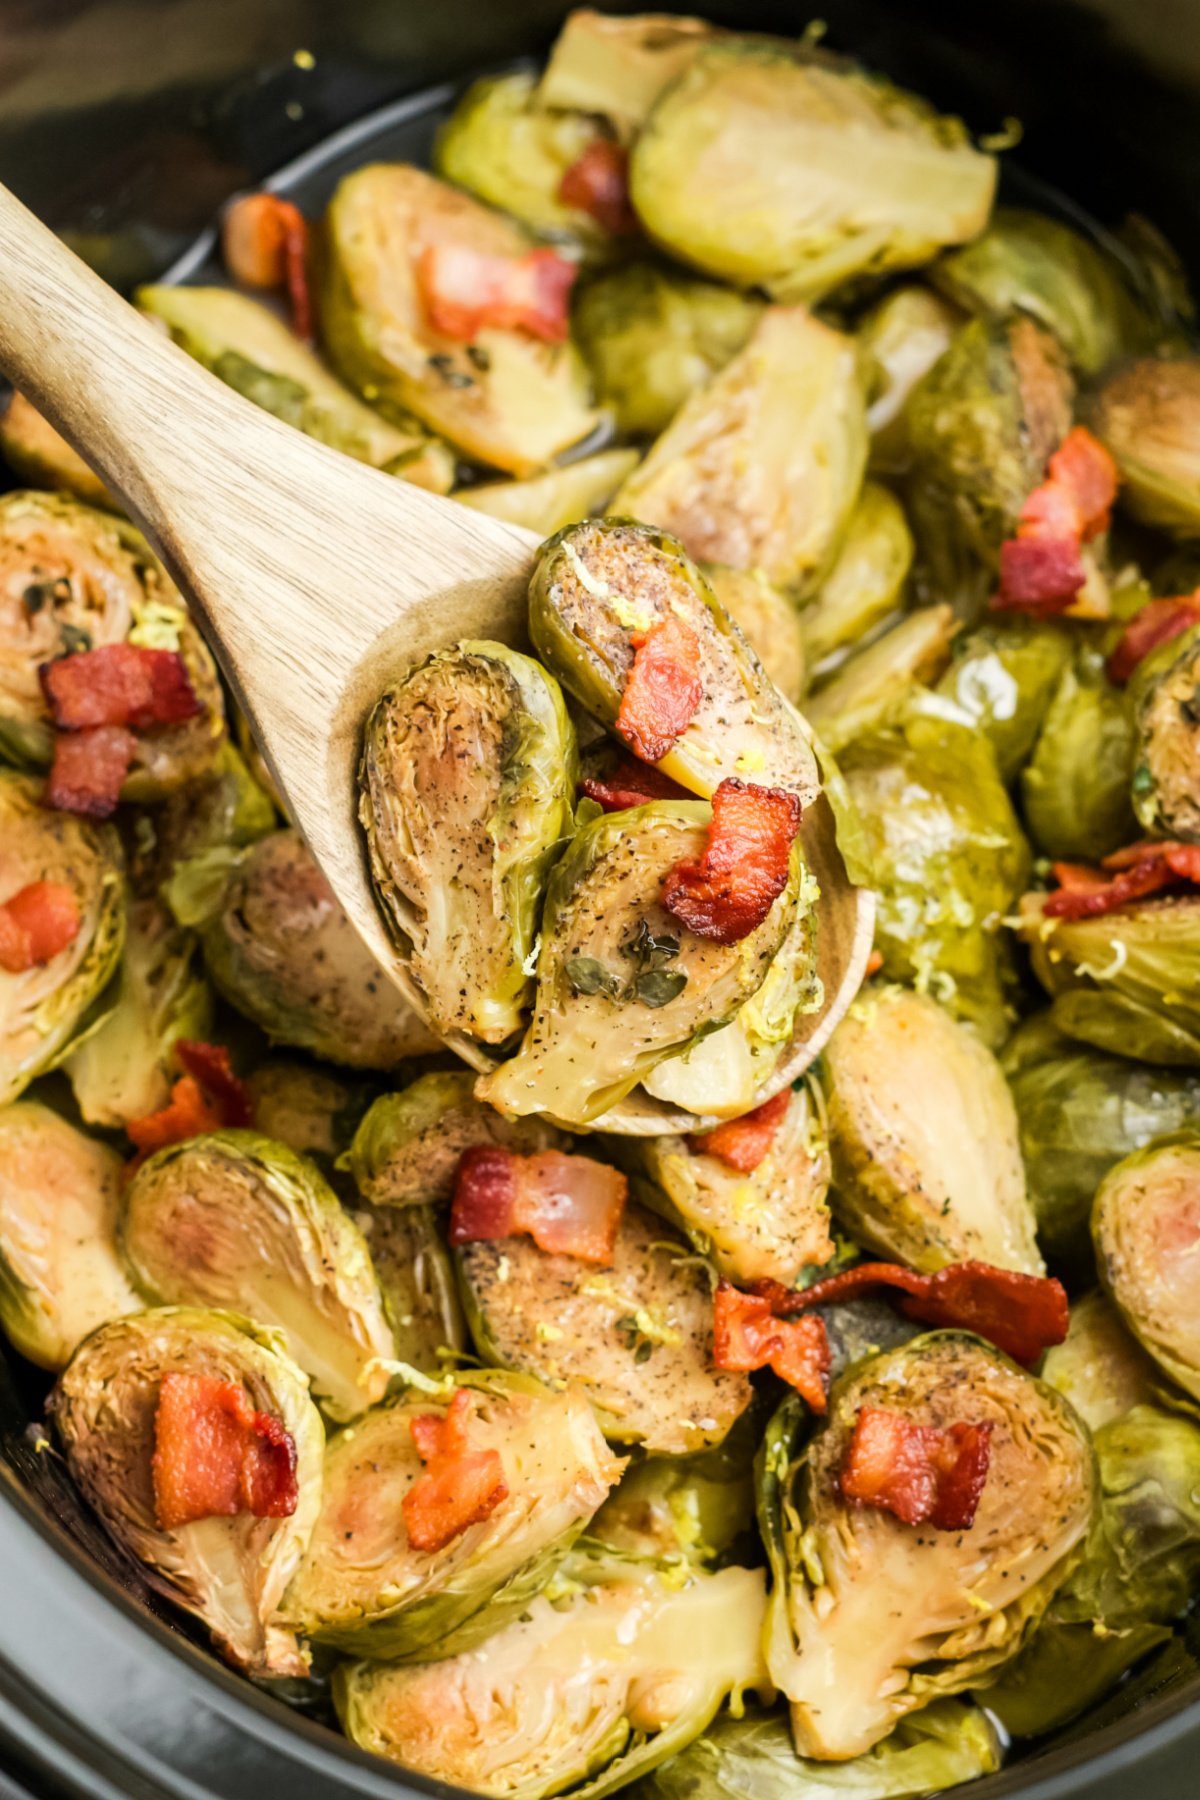 A wooden spoon lifting some cooked Brussels sprouts up from the slow cooker.